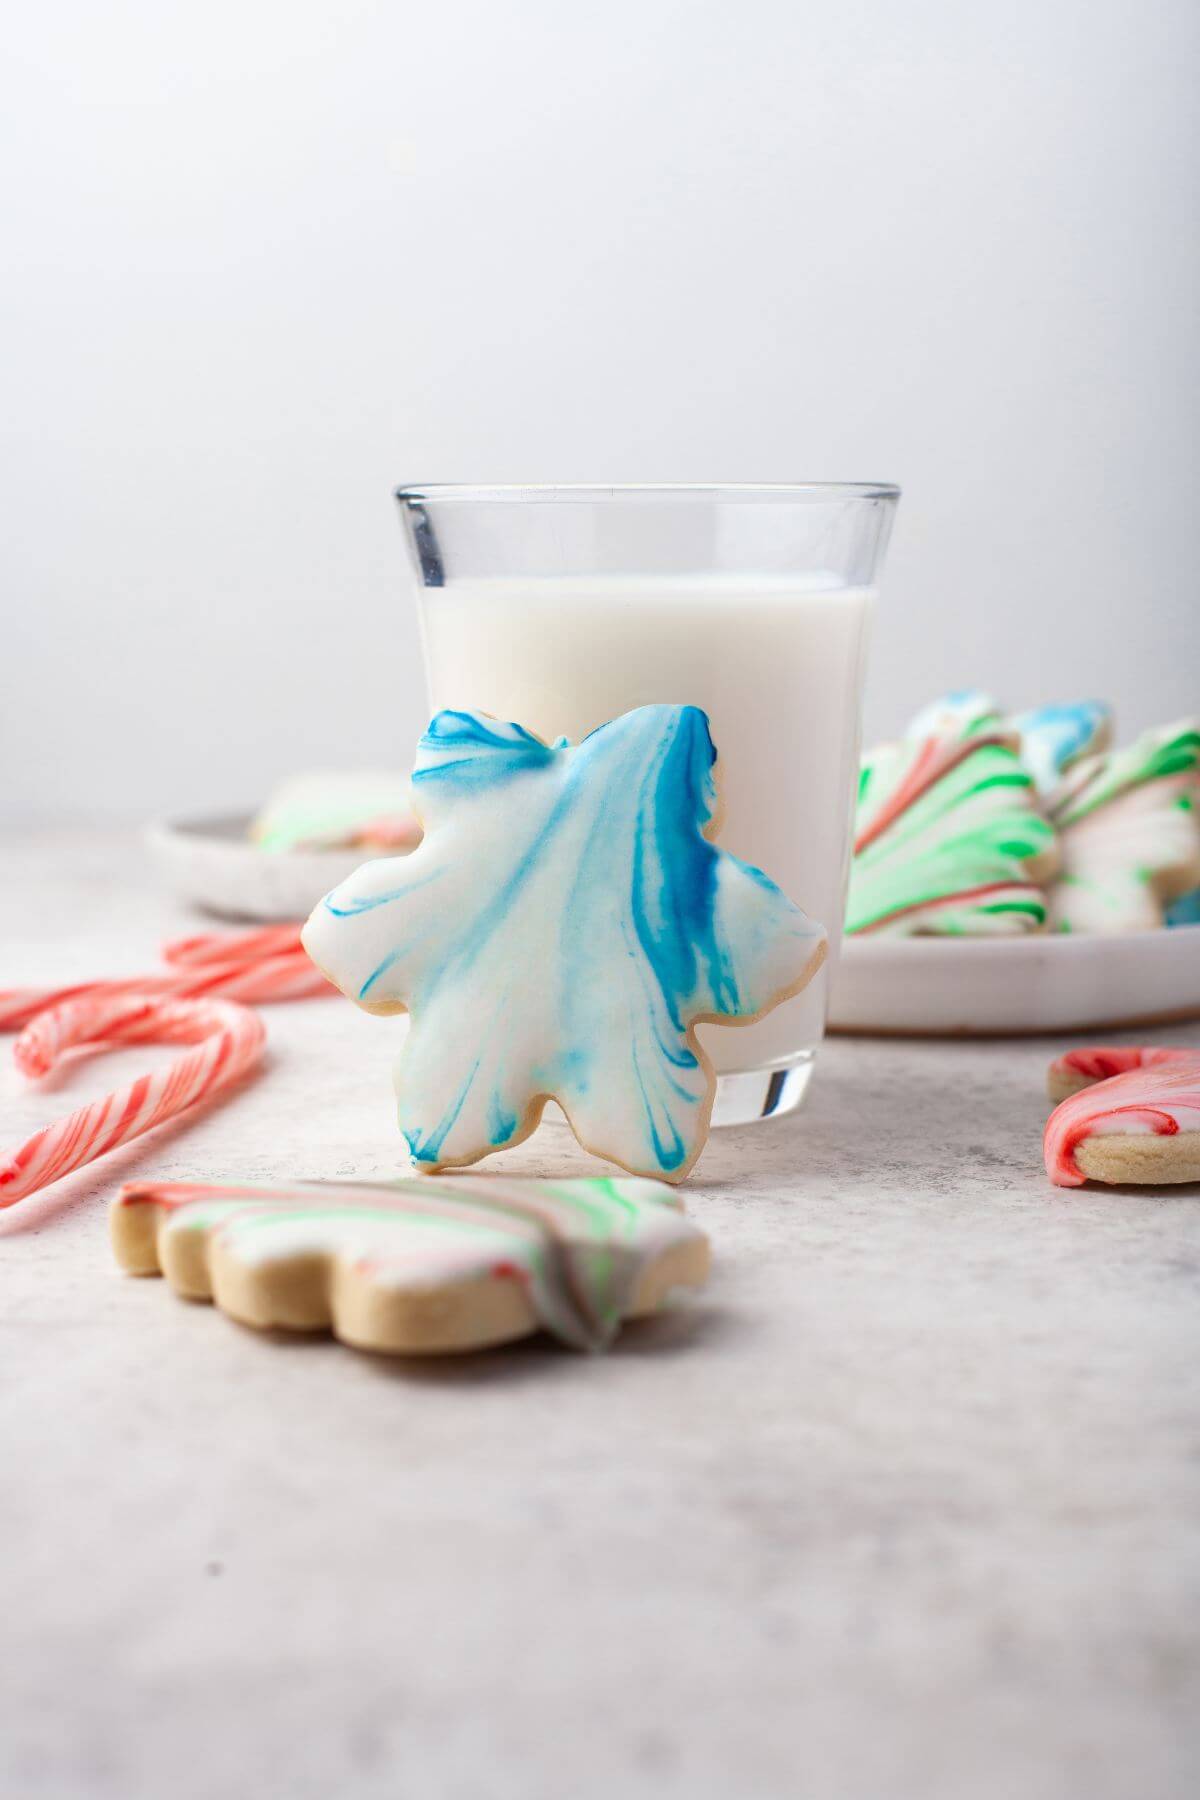 Bright blue leaf shaped cookie props on milk glass.